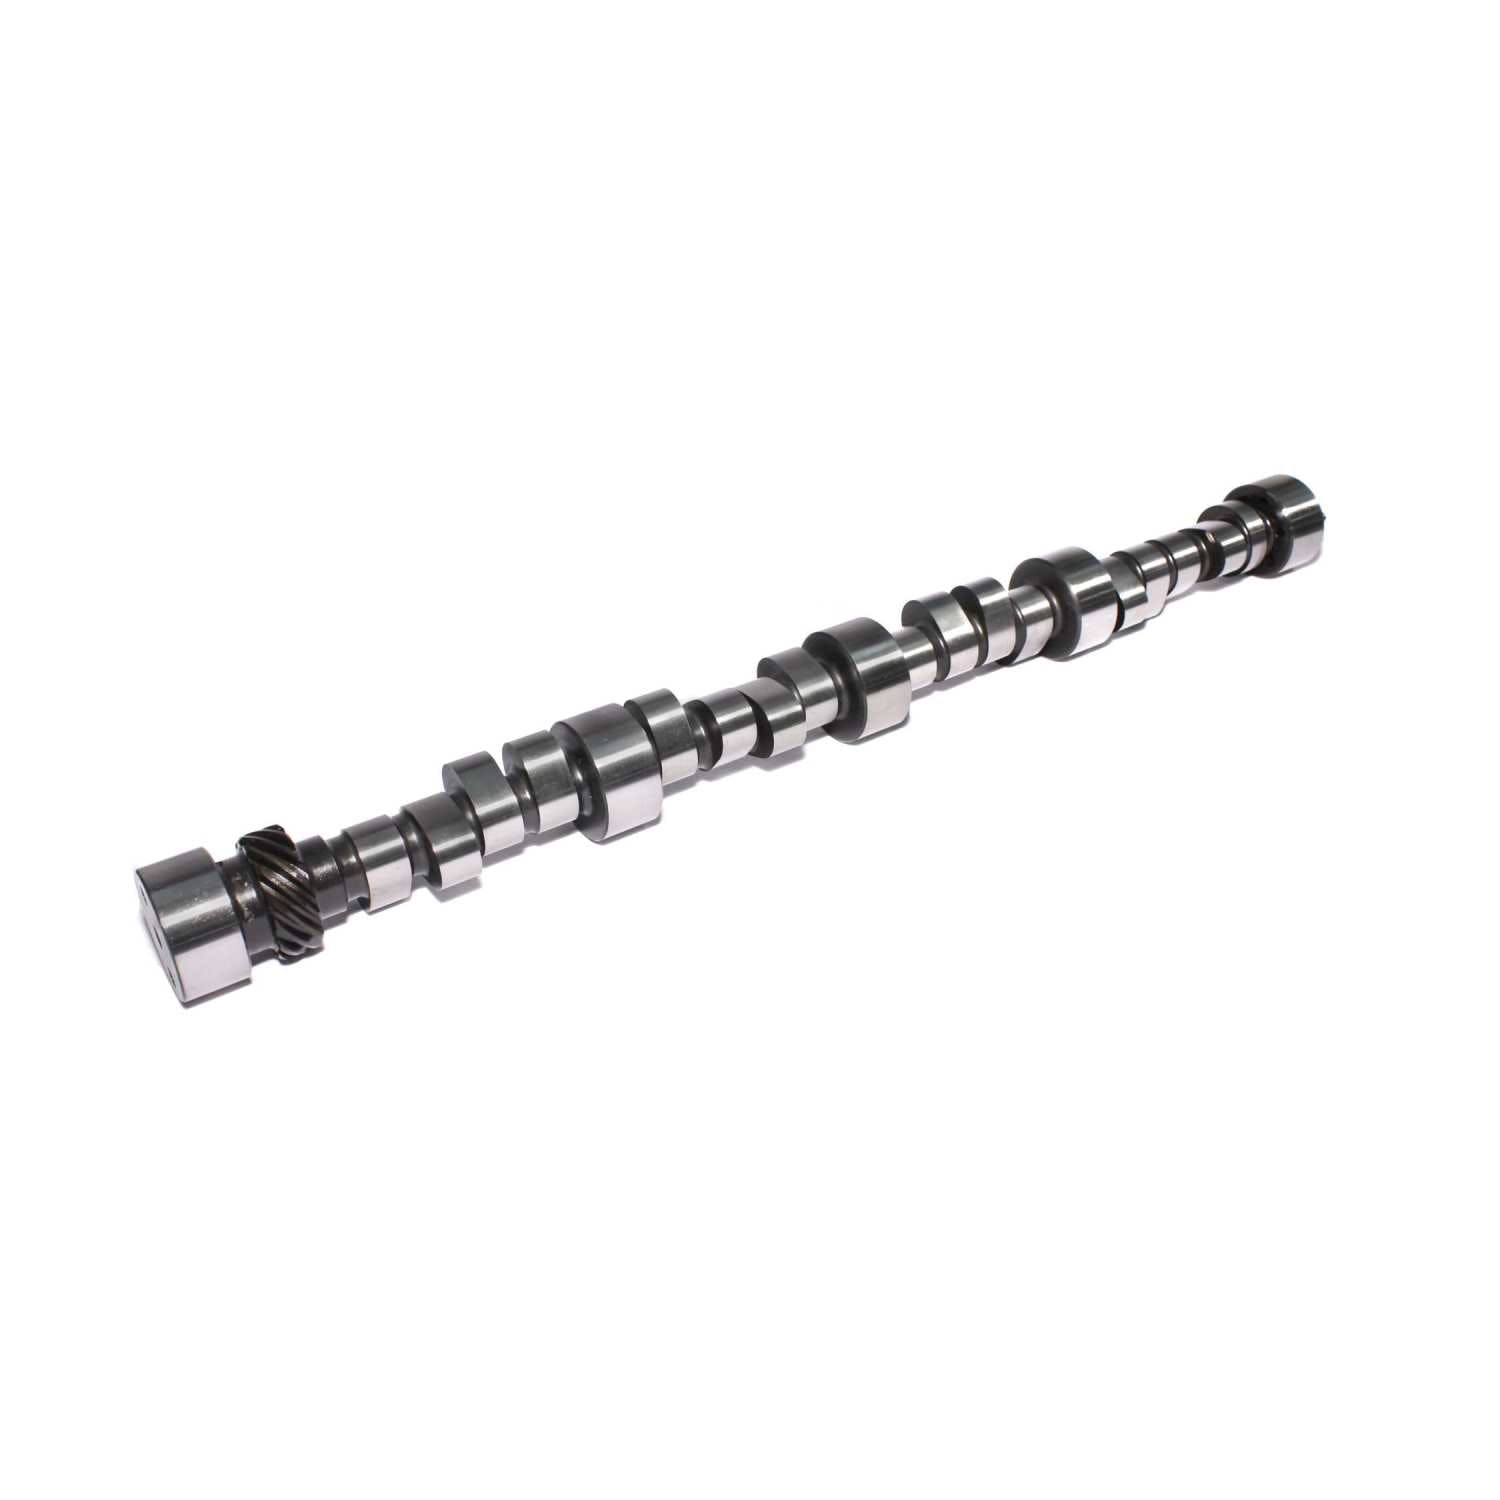 Competition Cams 11-735-9 Drag Race Xtreme RX Camshaft